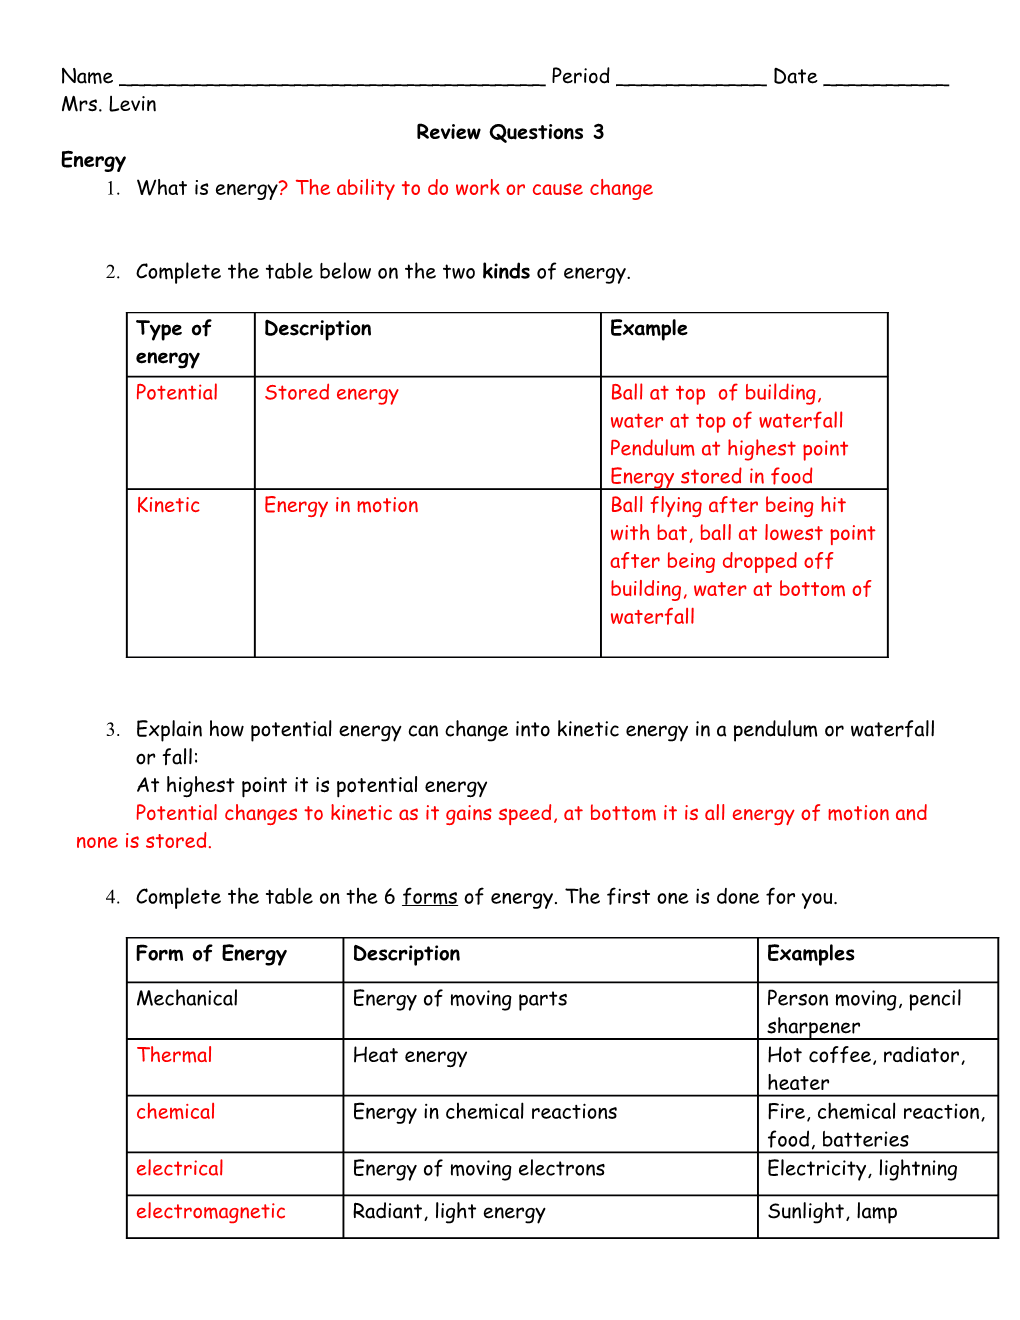 1. What Is Energy? the Ability to Do Work Or Cause Change